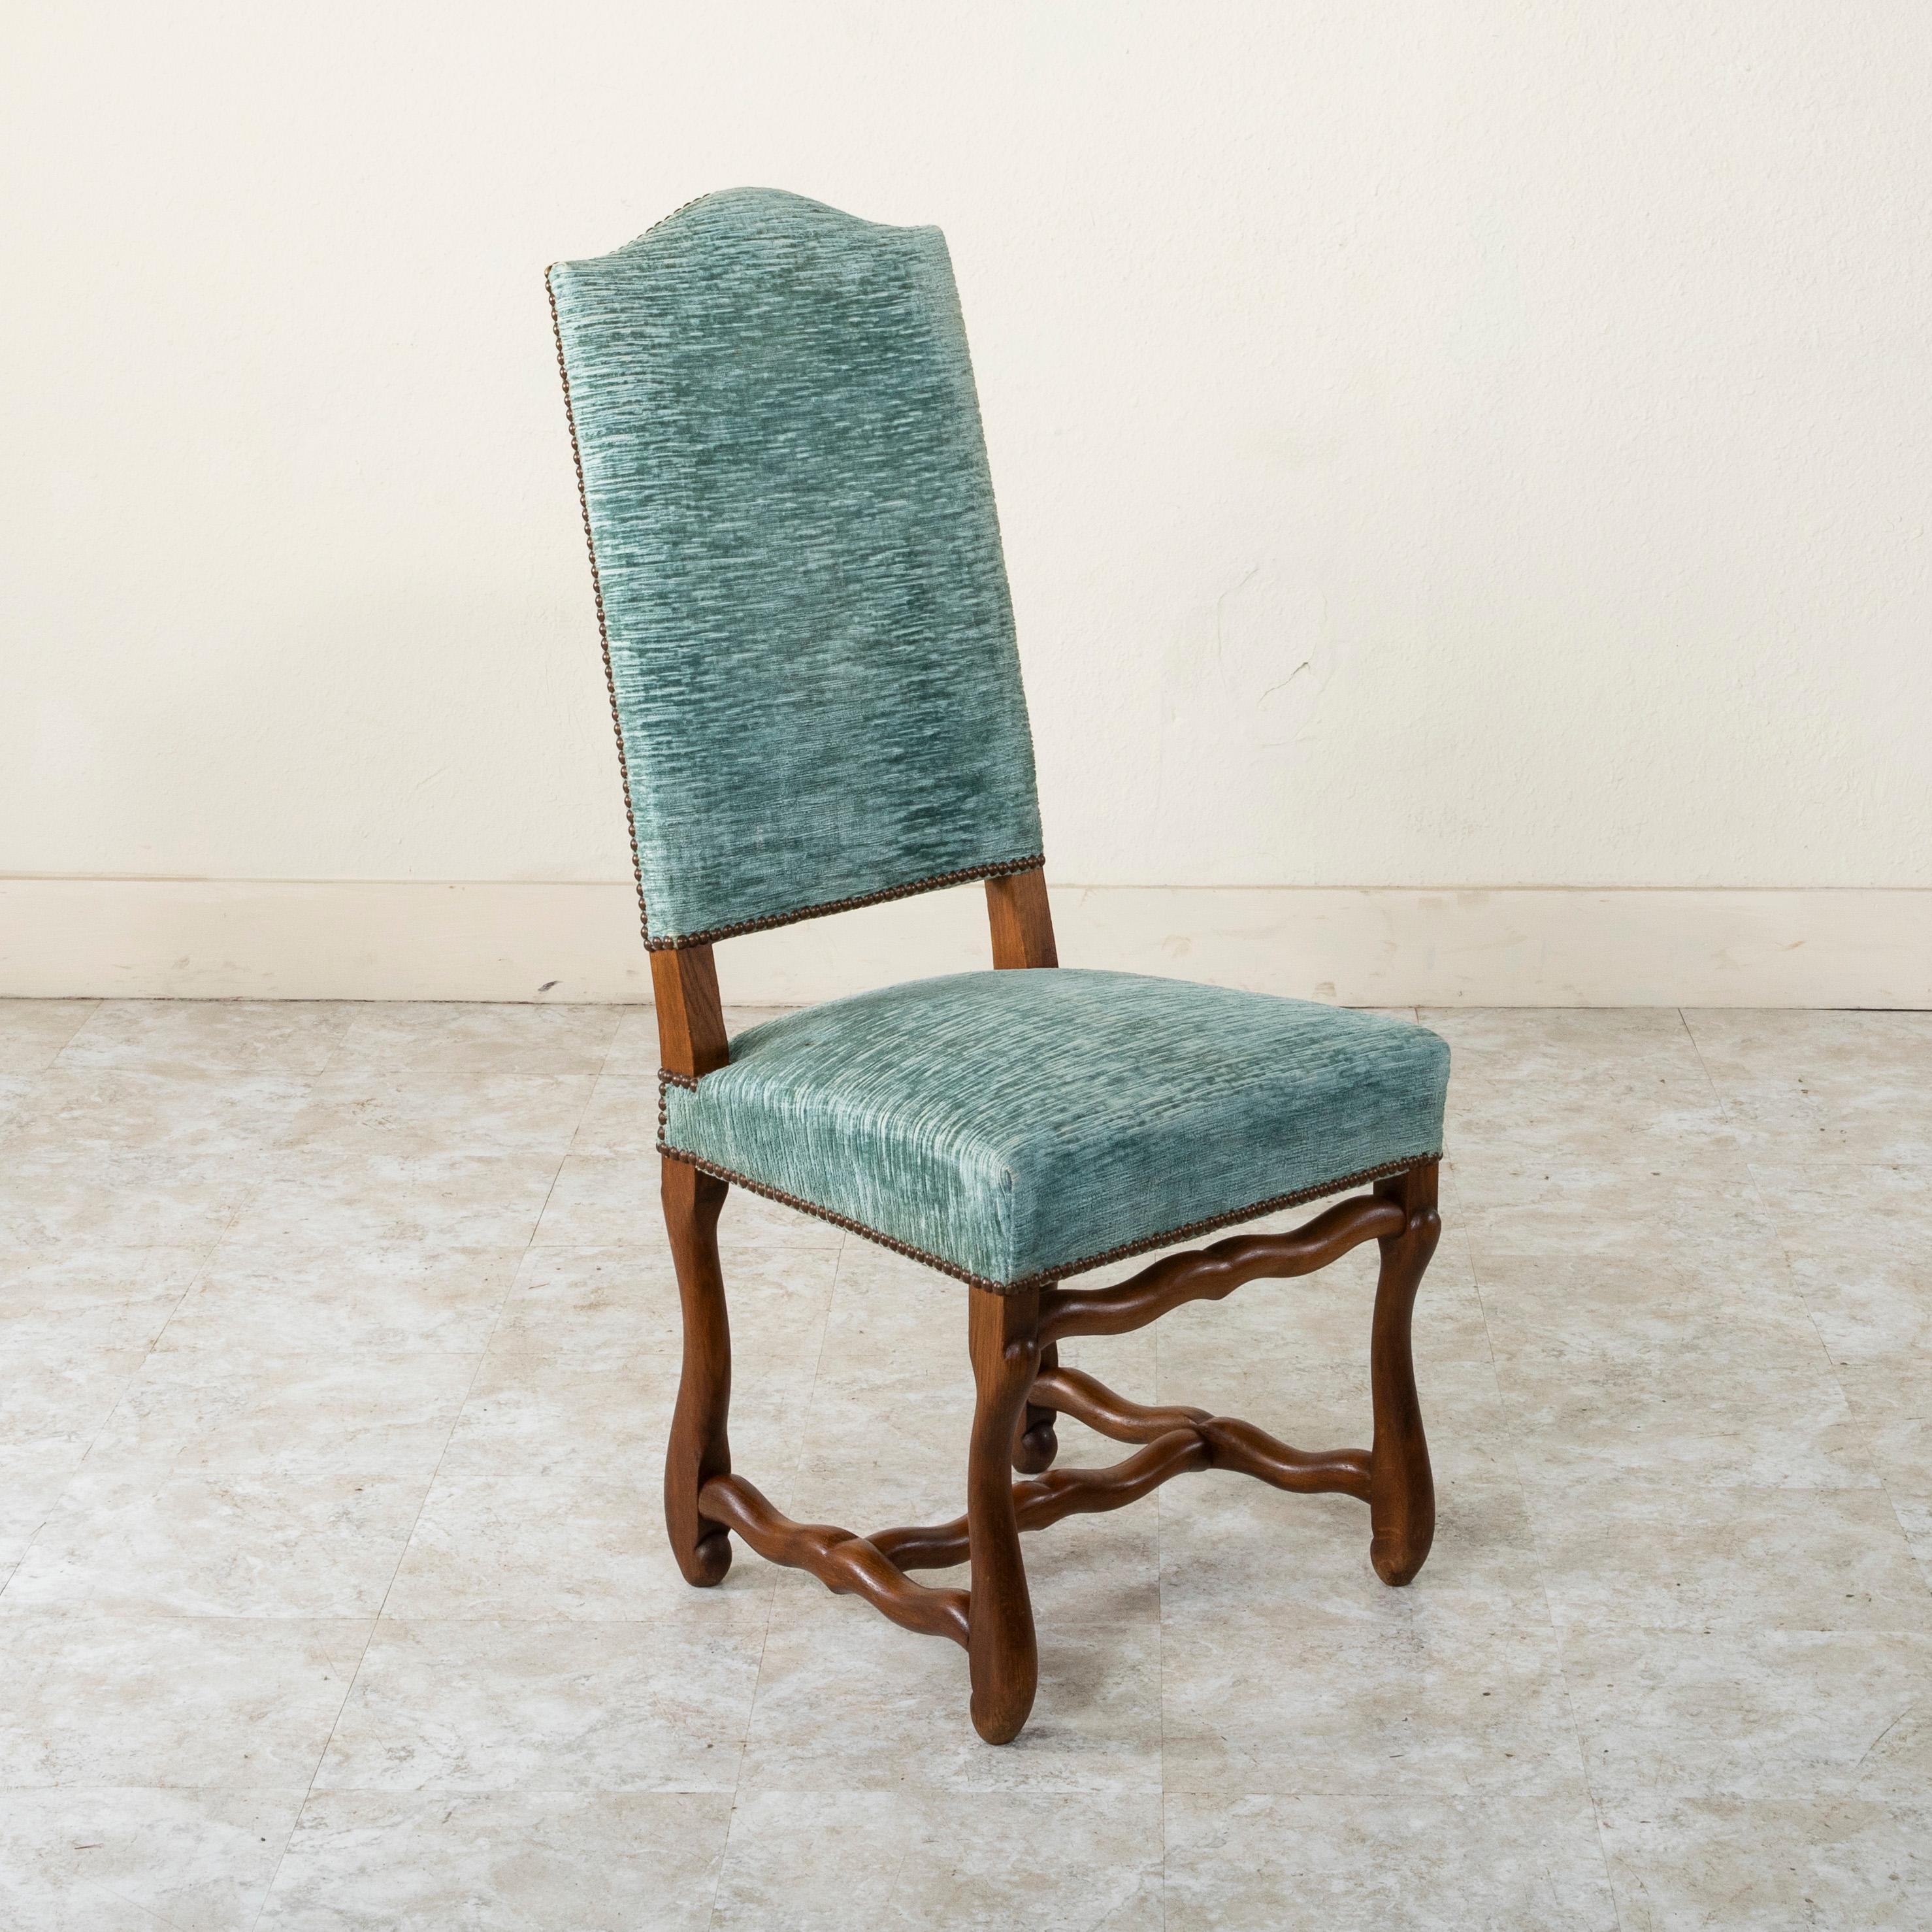 This set of eight French oak mutton leg side chairs or dining chairs from the mid-twentieth century are of hand pegged construction. These tall dining chairs with arched backs are upholstered in a blue mohair and finished with nail head trim. The